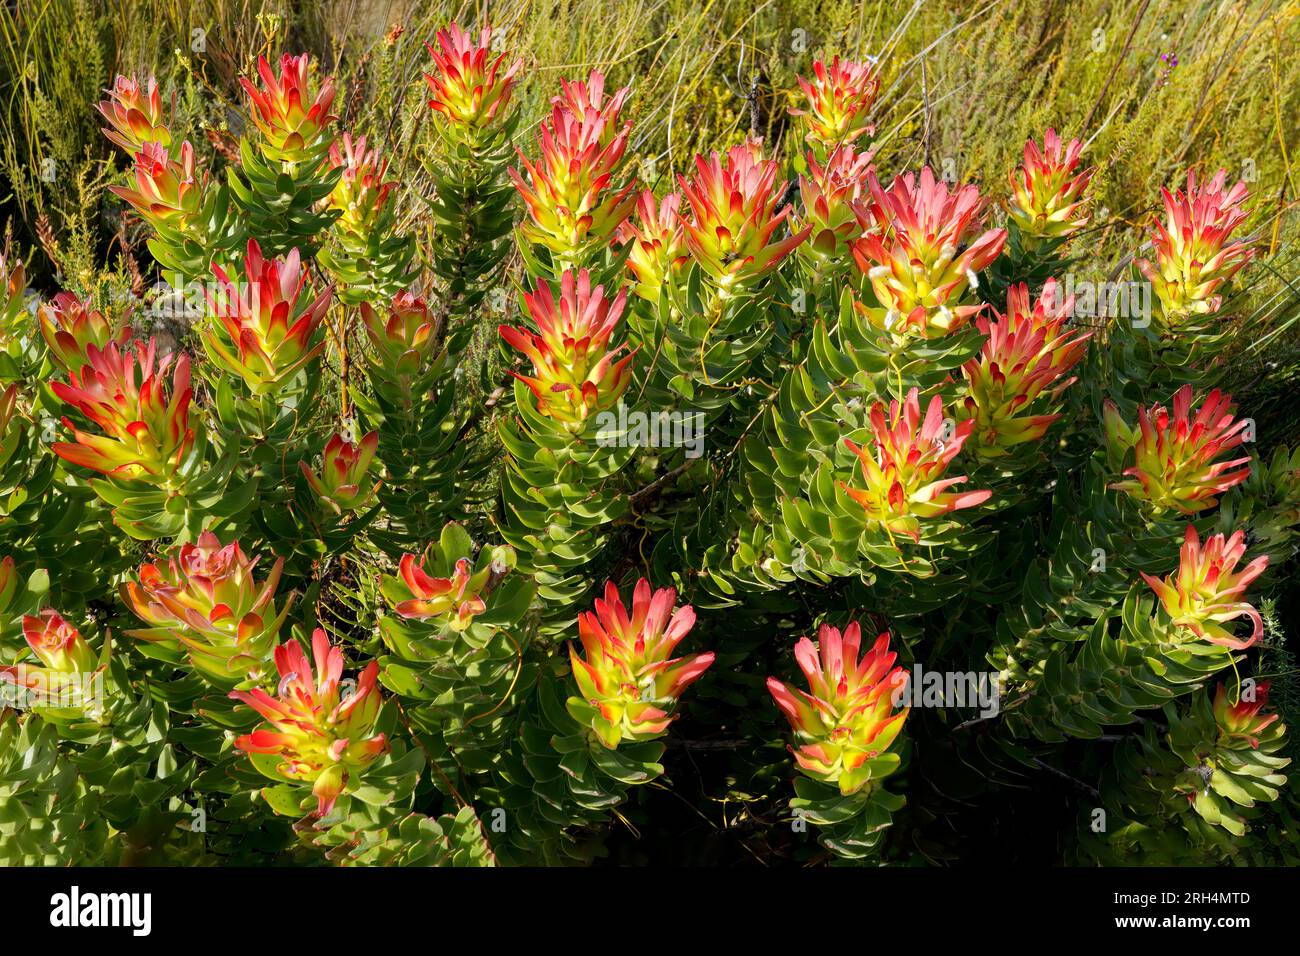 Colorful protea plants in the Harold Porter National Botanical Garden, South Africa Stock Photo